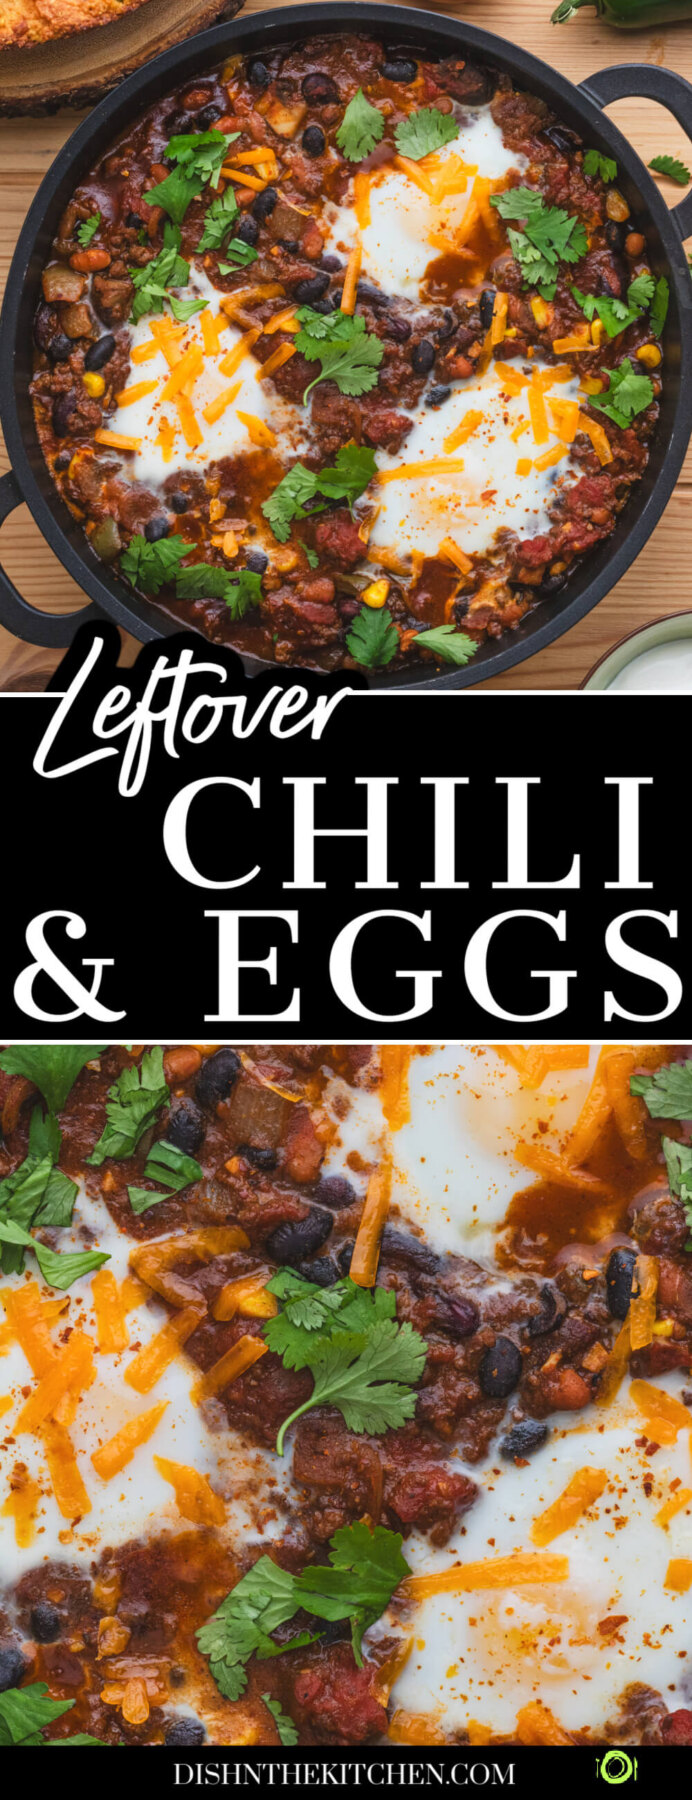 Pinterest image featuring a cast iron skillet full of baked chili and eggs beside jalapeno cheddar cornbread.